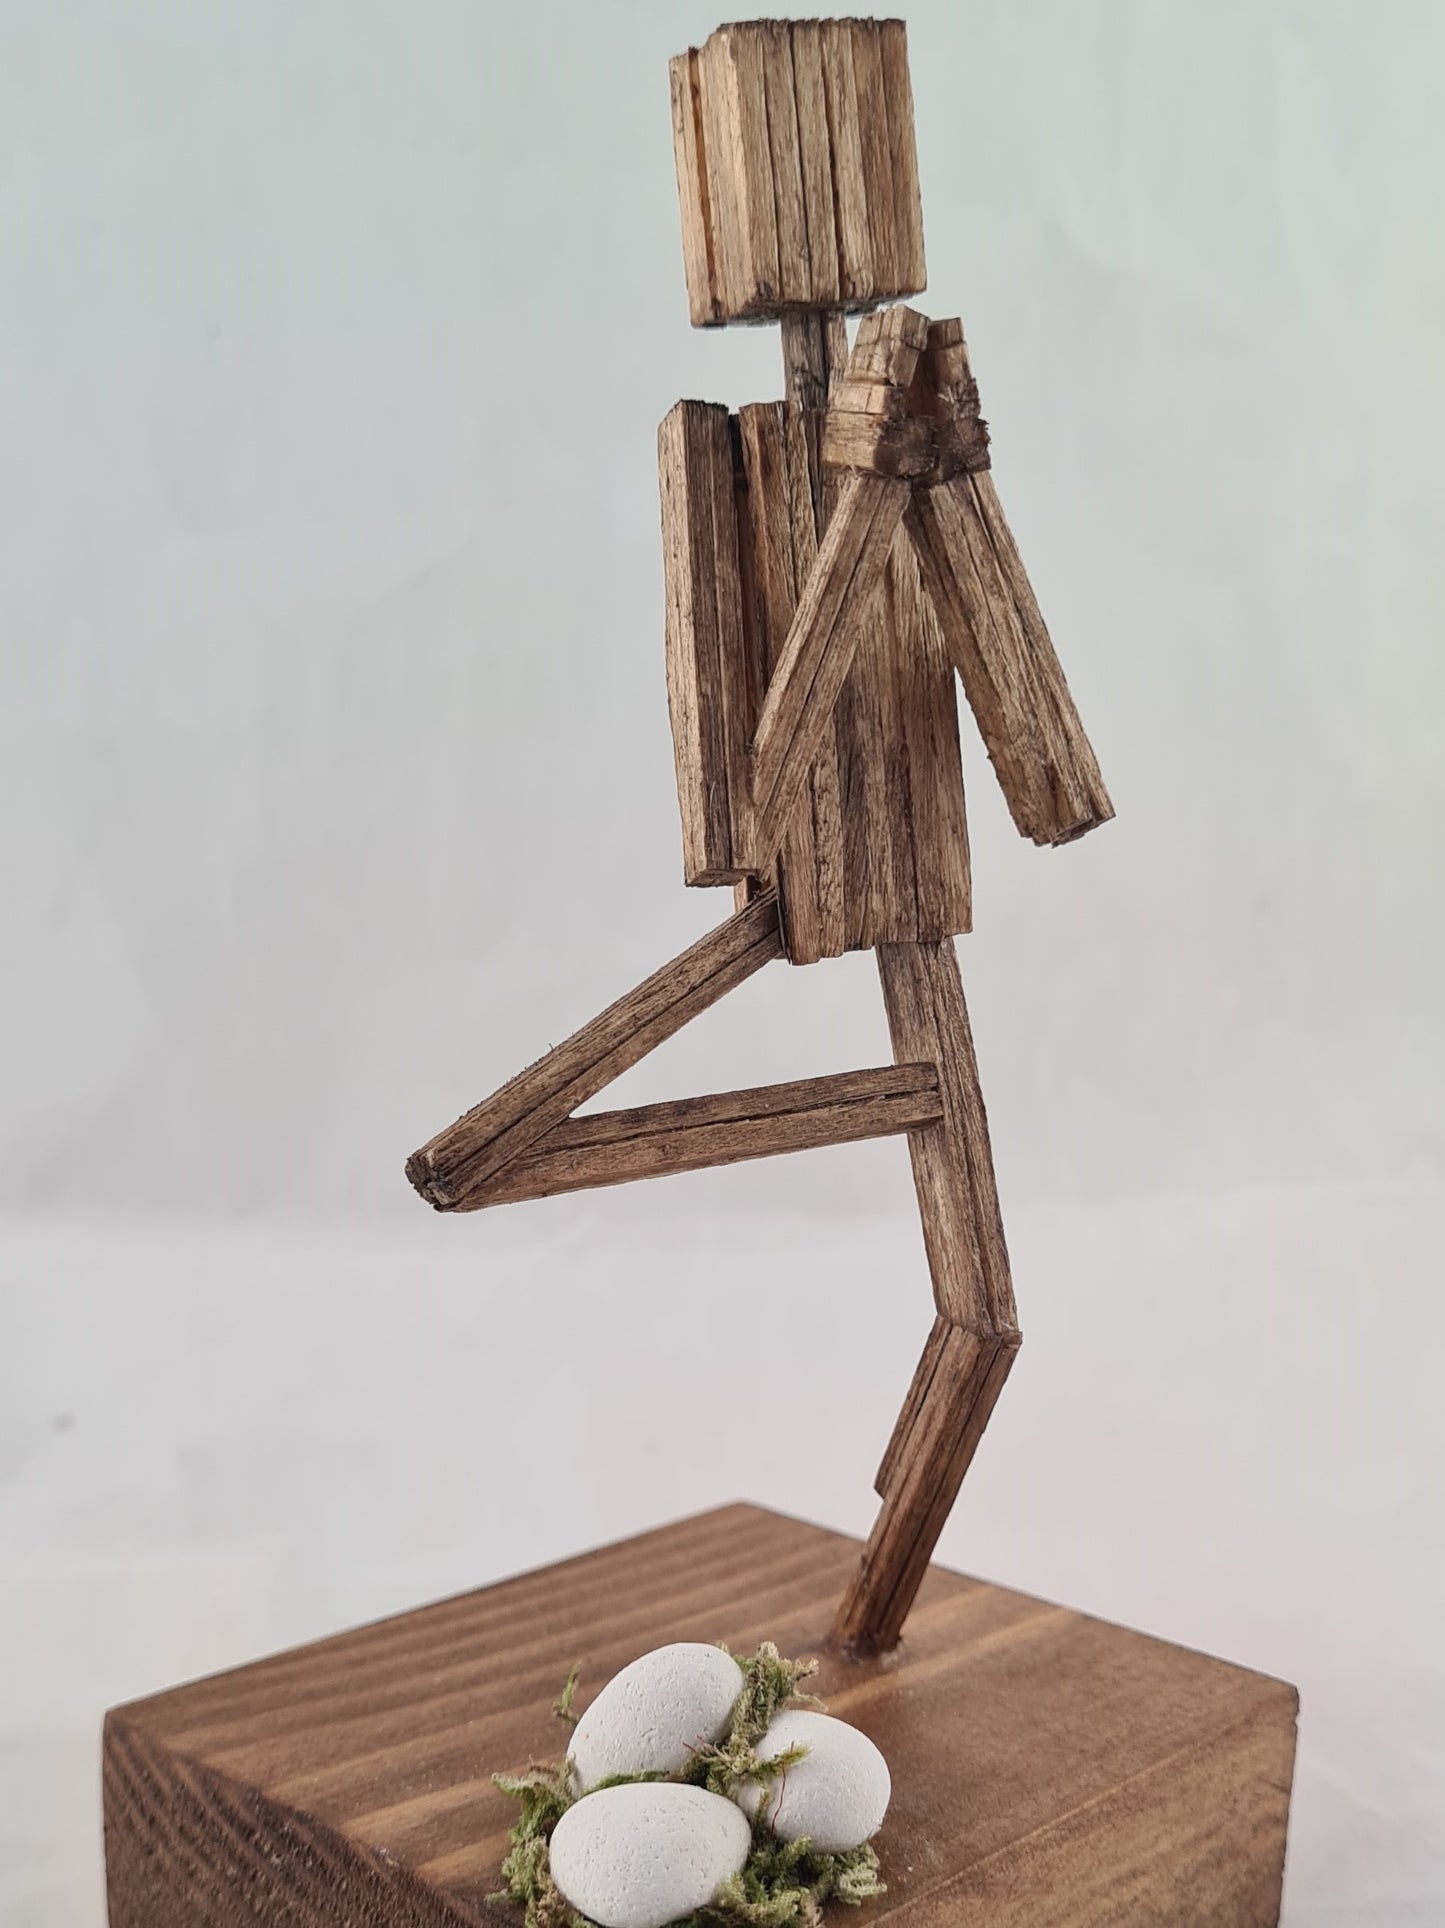 Tree Pose - Handcrafted Wooden Matchstick Figures - Gifts, Ornaments and Decor By Tiggidy Designs